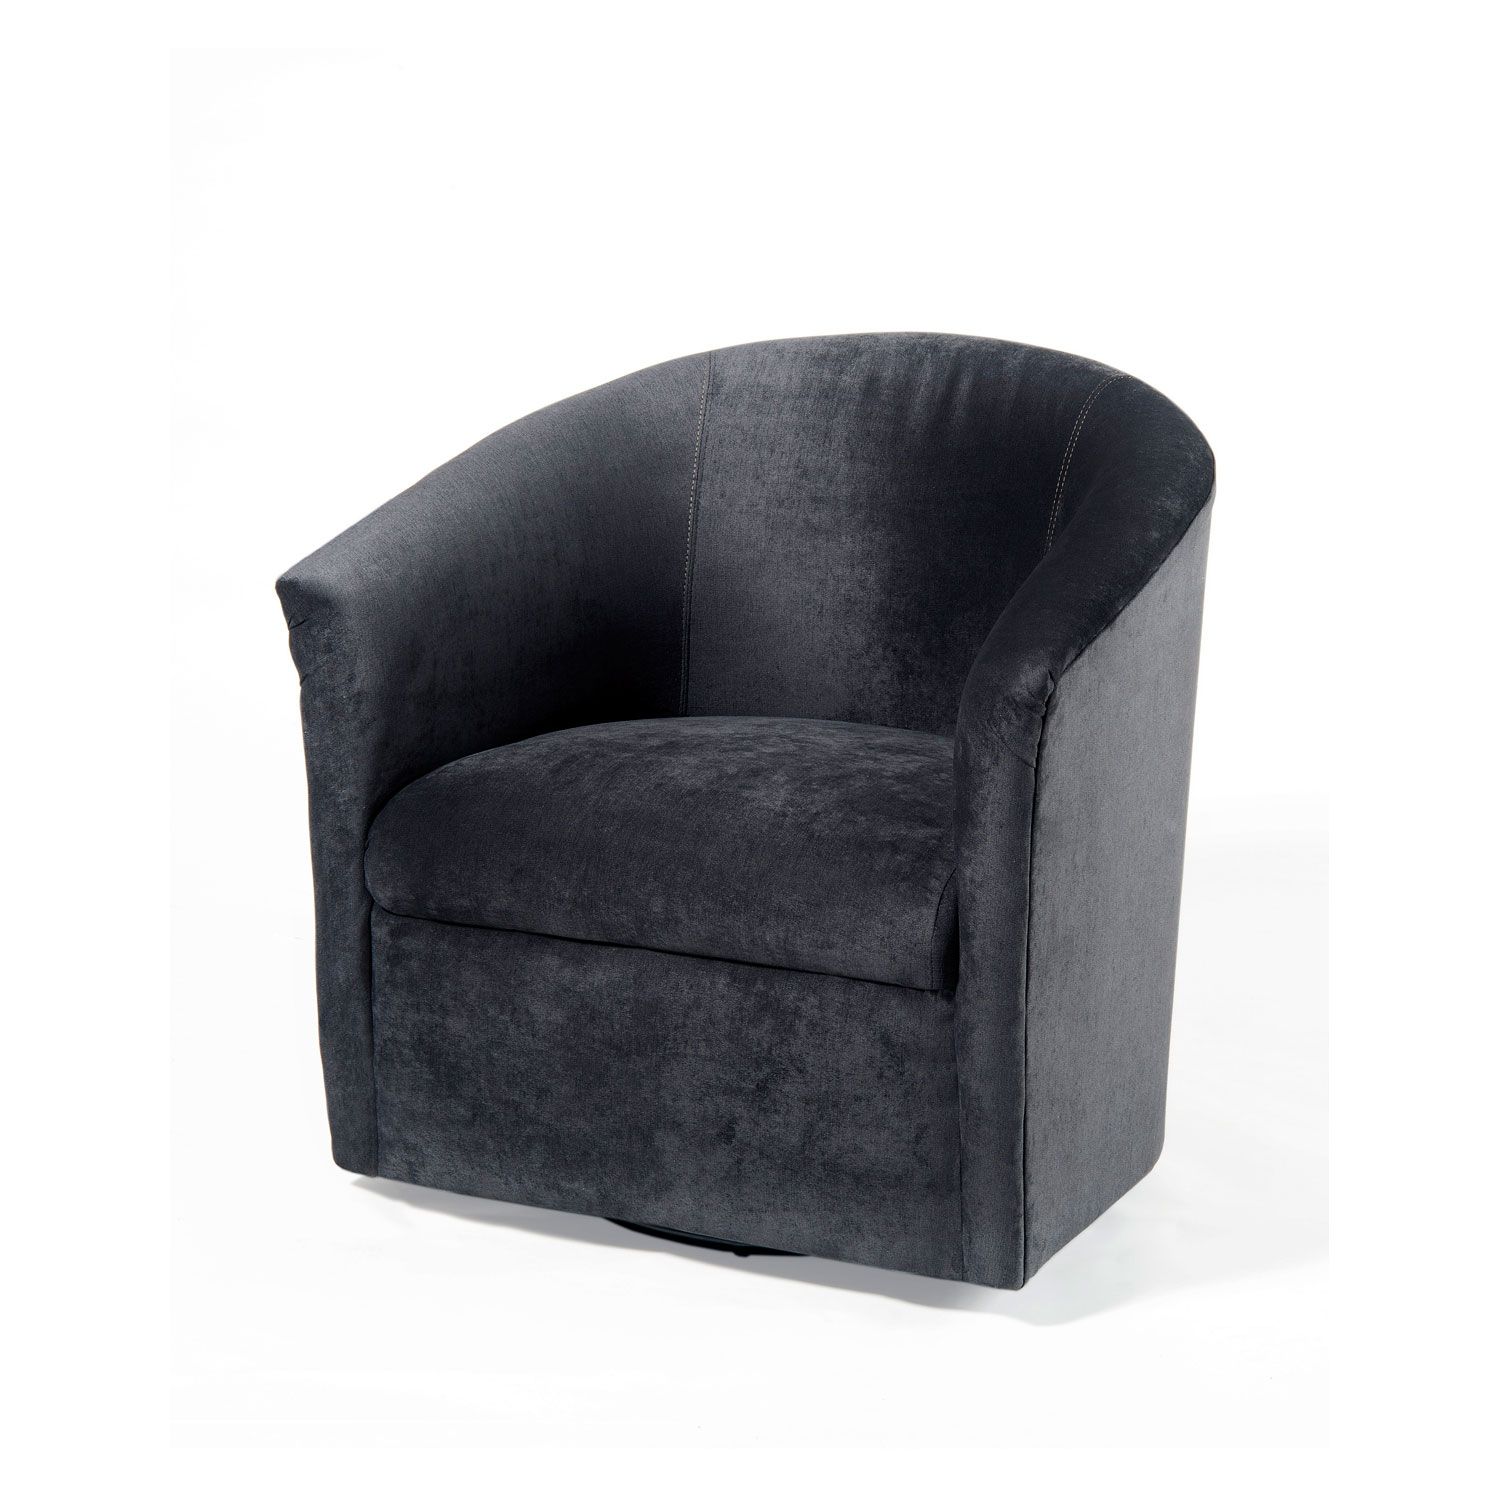 Comfort Pointe Elizabeth Charcoal Swivel Chair 2001 02 | Bellacor For Charcoal Swivel Chairs (View 2 of 25)